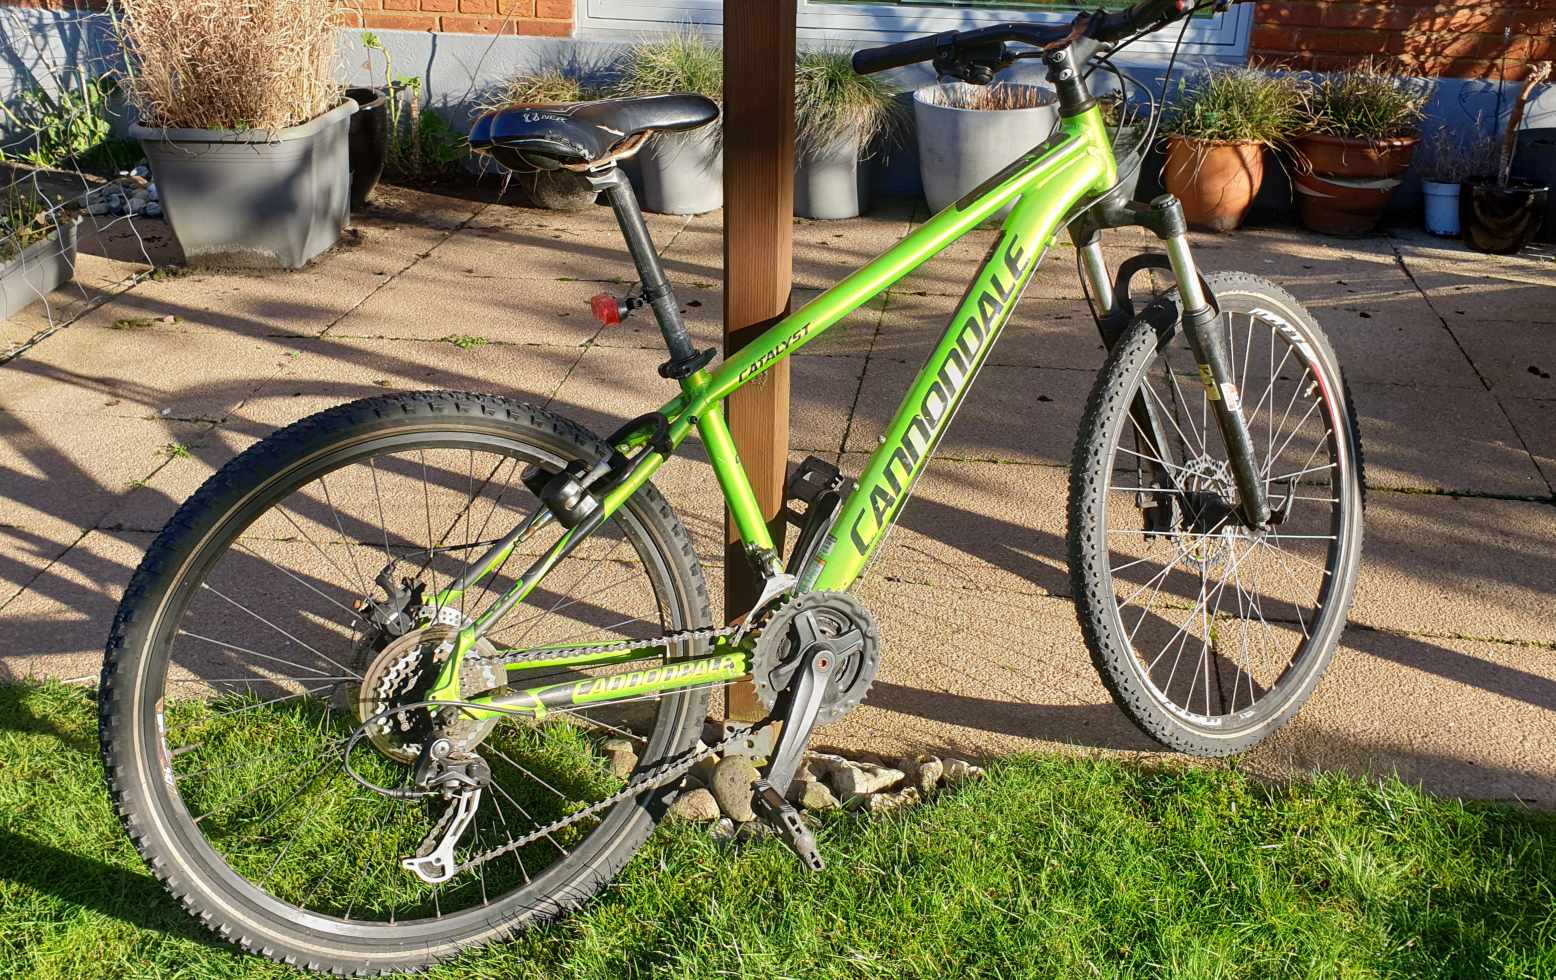 Cannondale, anden mountainbike, 26 tommer